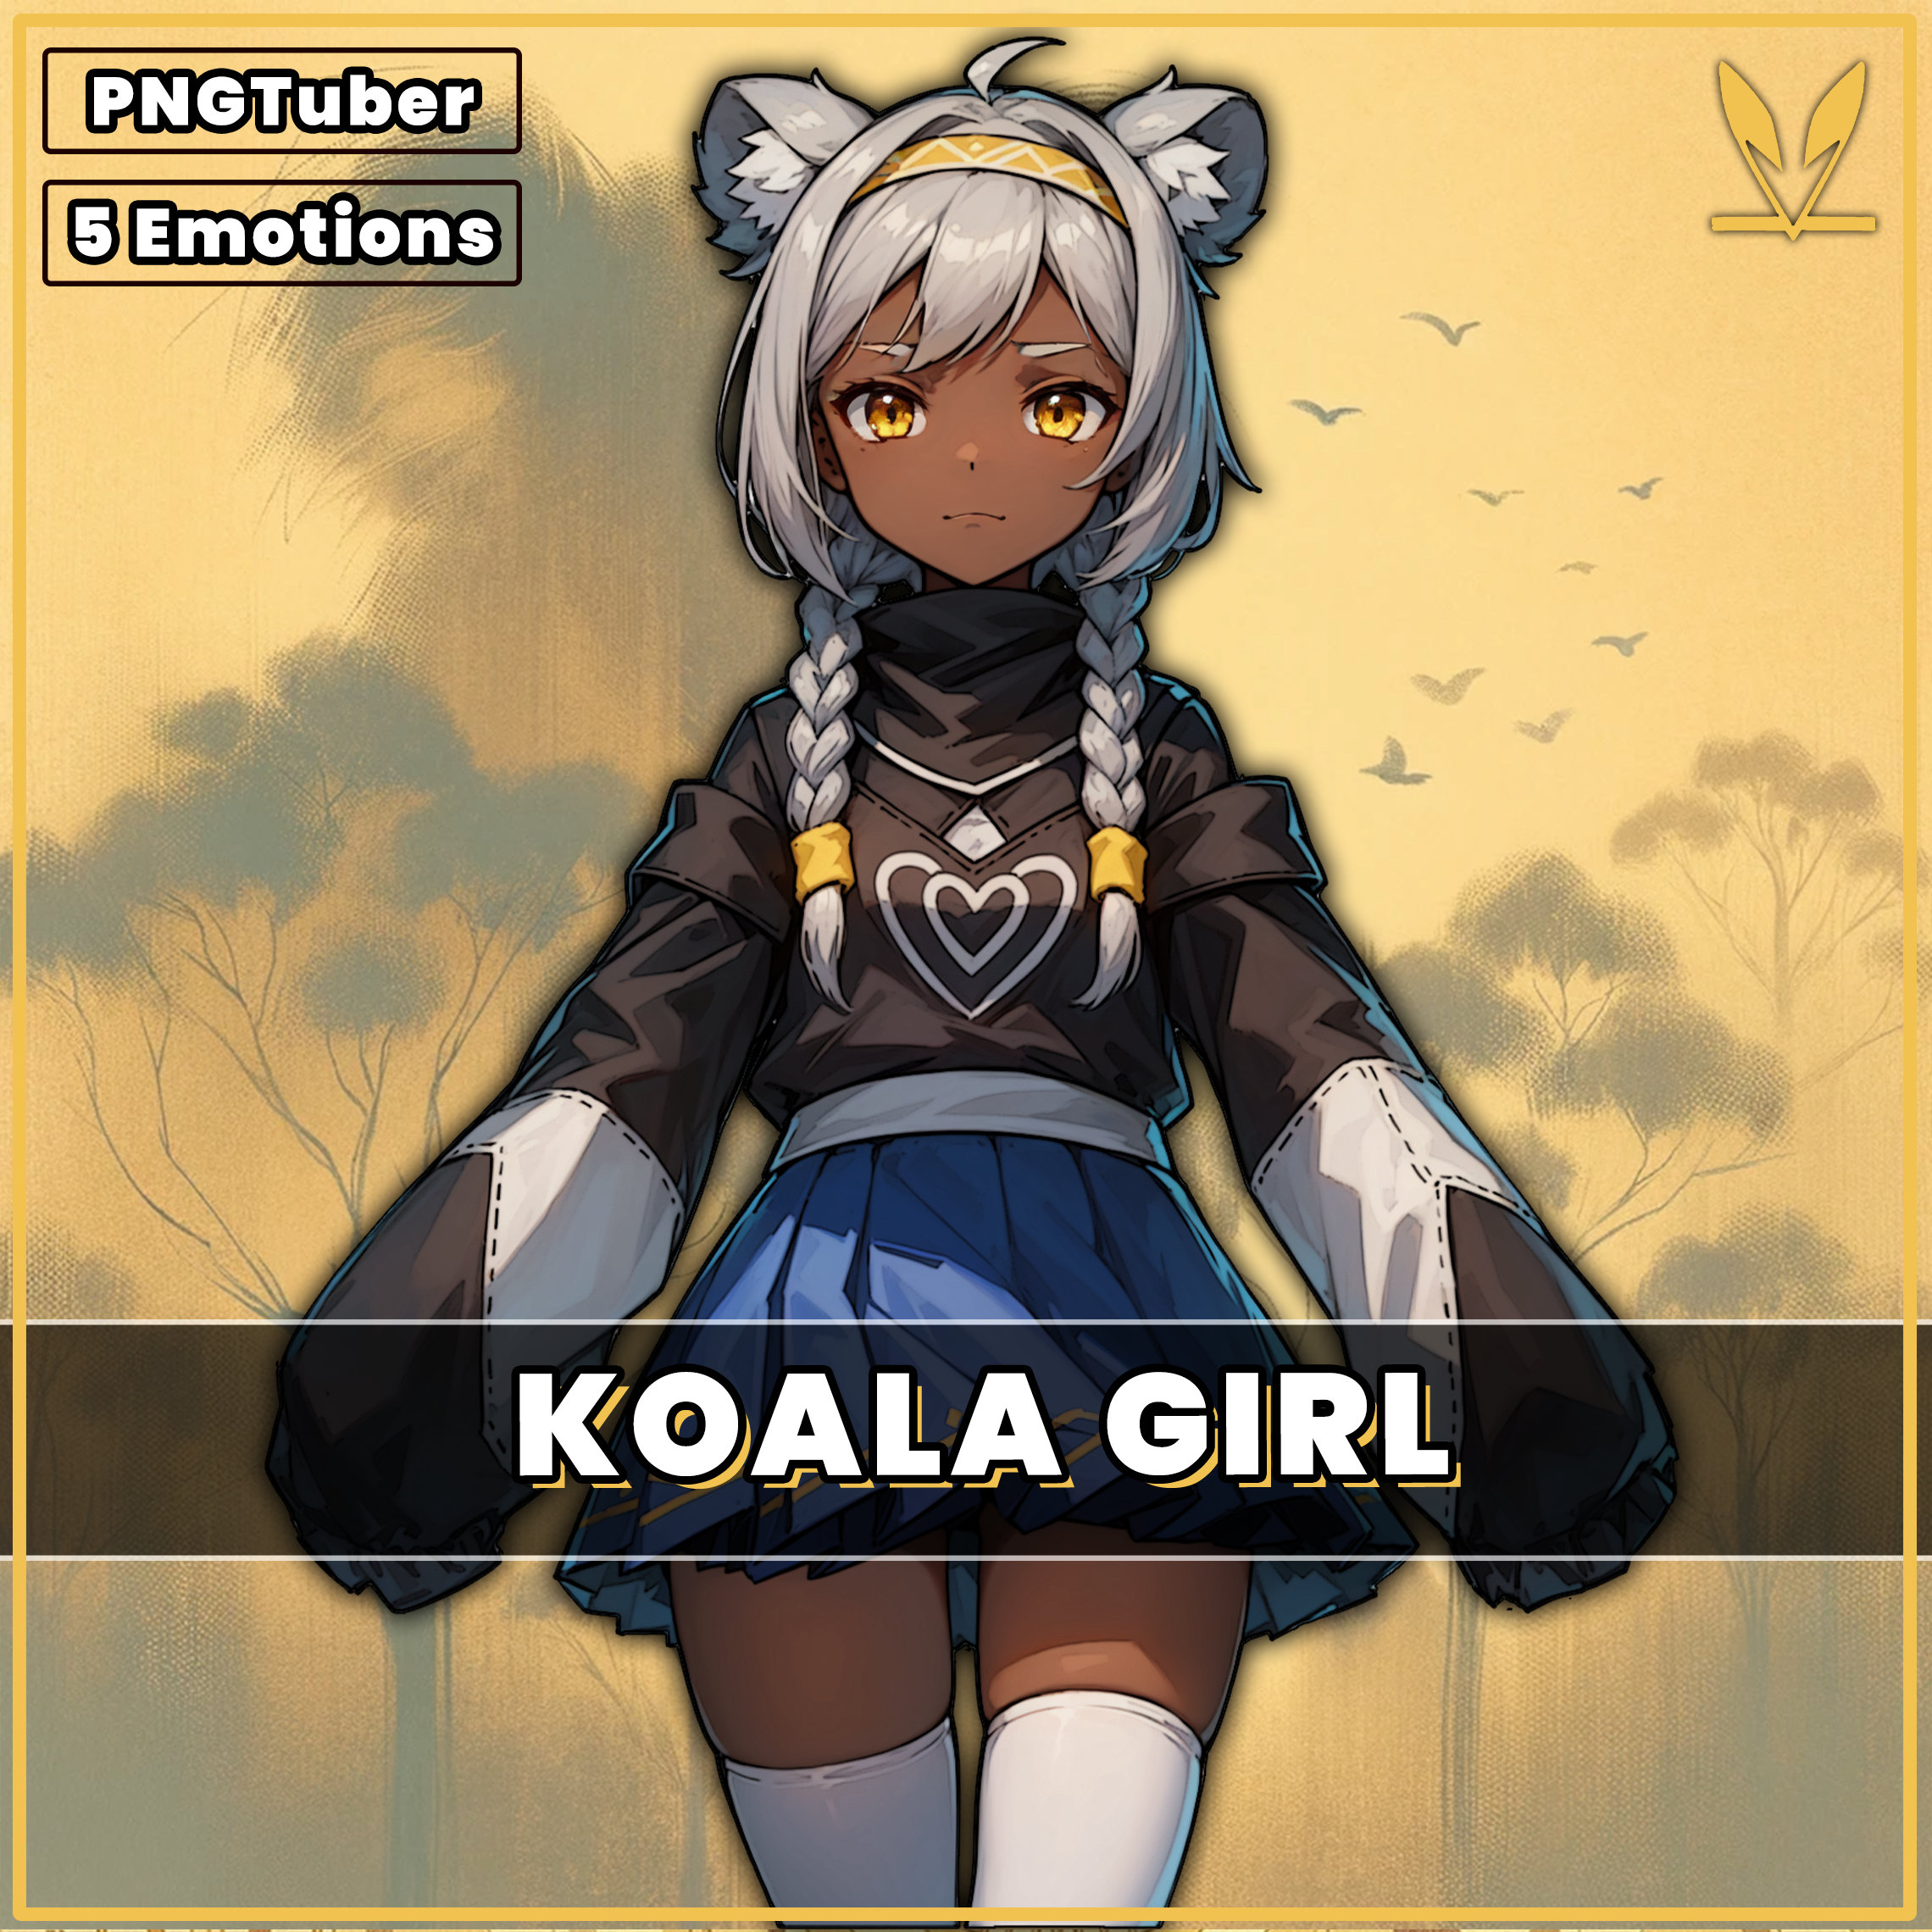 Pngtuber Koala Girl With 5 Expressions Ready to Go. Good for Streaming as a  2D Female Pngtuber 